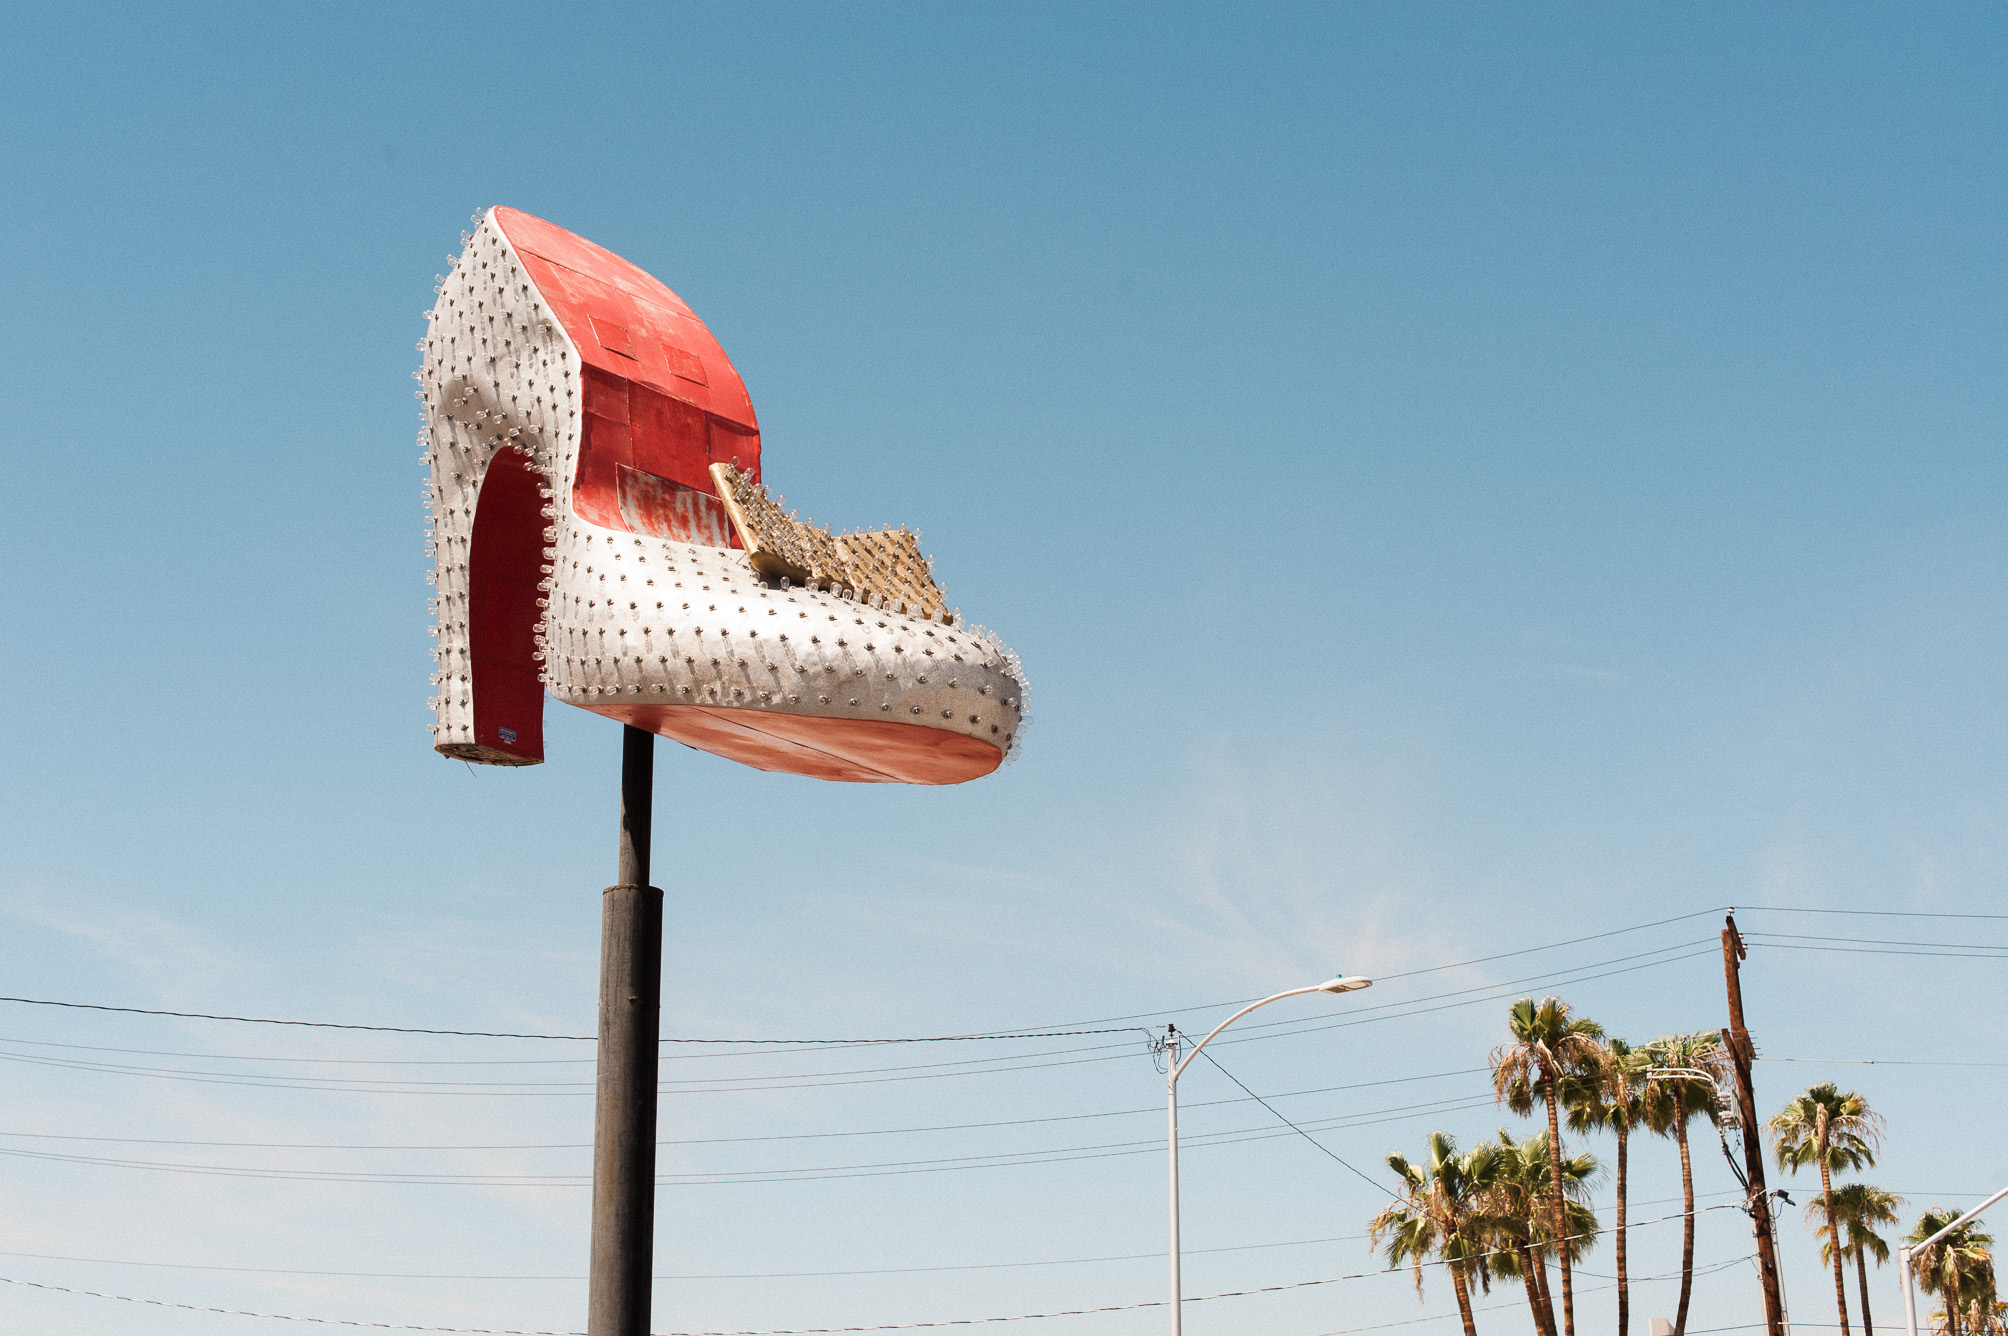 The Silver Slipper retro neon sign in Las Vegas, Nevada. Photographed by traveling photographer Briana Morrison.